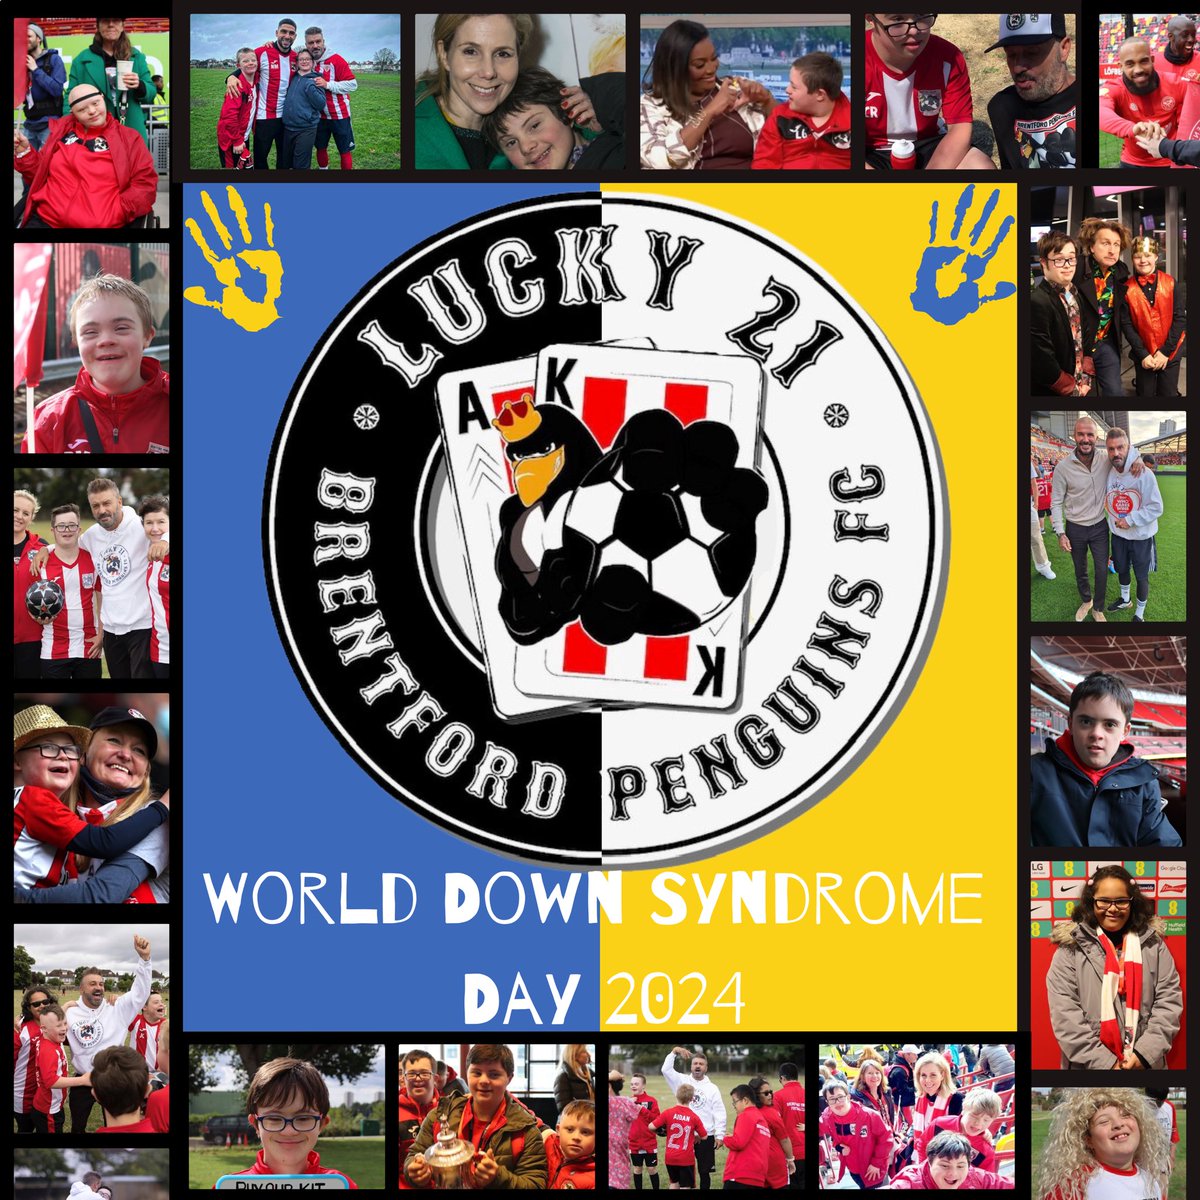 💙💛 Happy World Down Syndrome Day 💛💙 The Brentford Penguins are kicking stereotypes to the curb and they make us all proud, on and off the pitch. Keep spreading kindness and love #worlddownsyndromeday #endthestereotype #rockyoursocks #brentfordpenguinsfc #lucky21